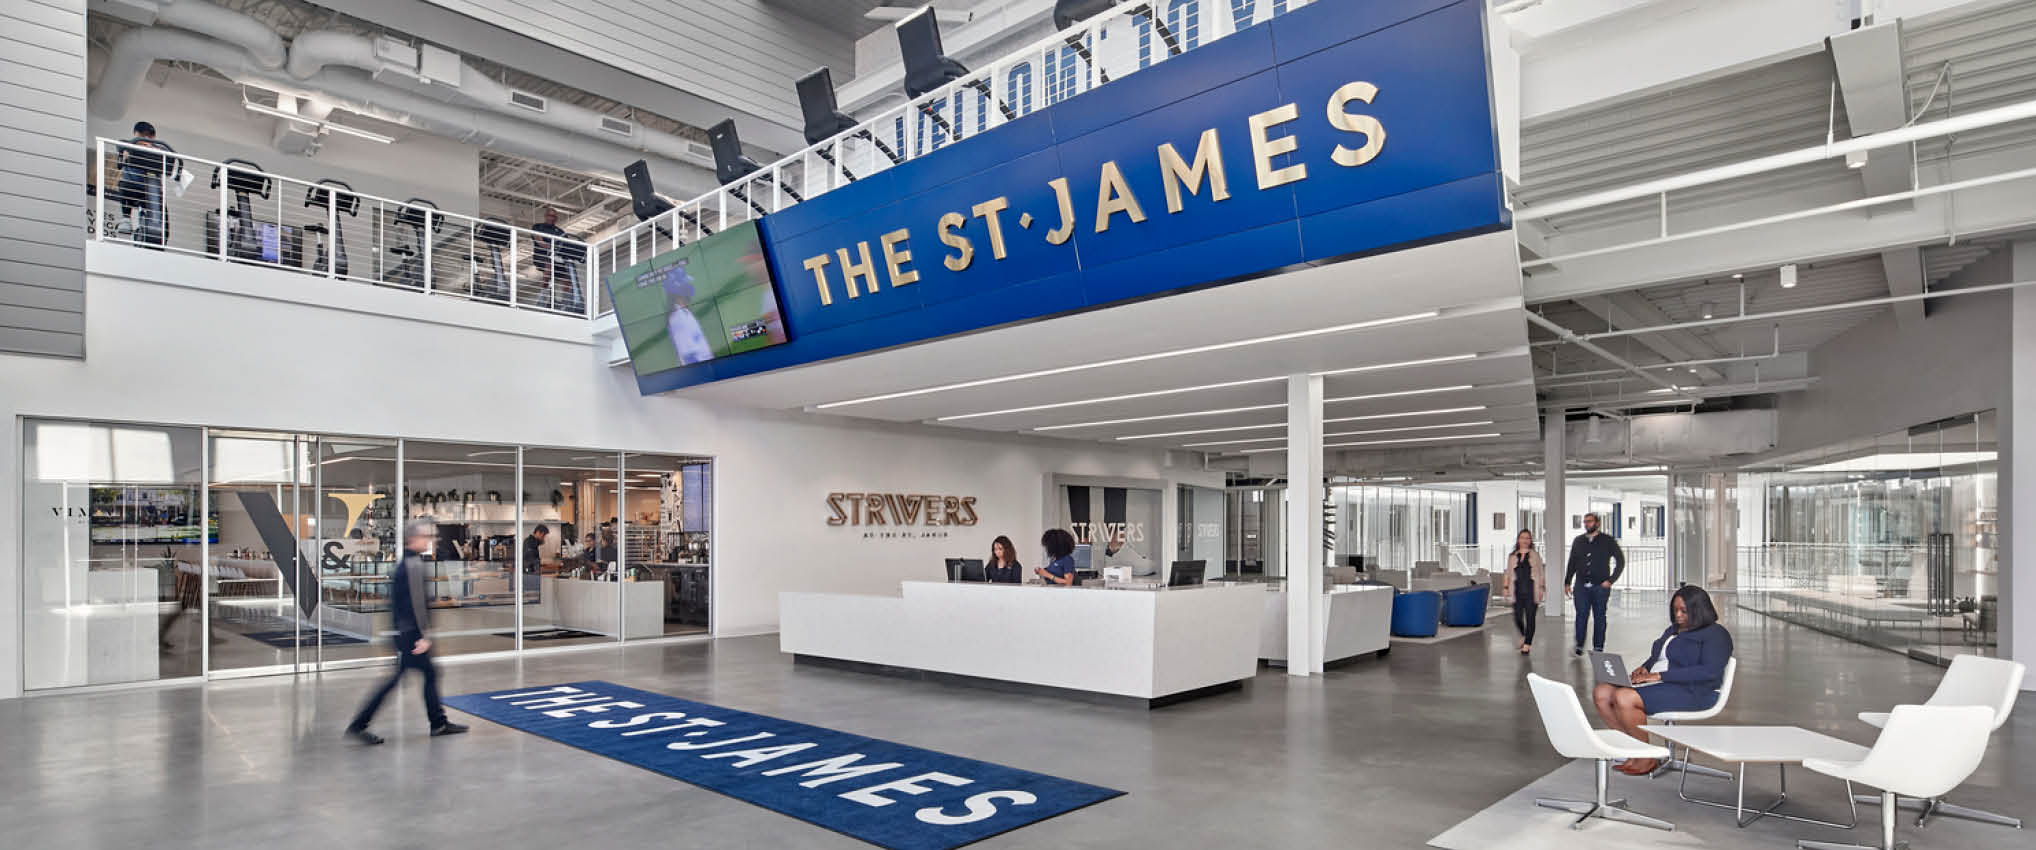 Interior Design Lists HKS-Designed The St. James As One of the Top 10 Health, Wellness & Beauty Projects of 2019